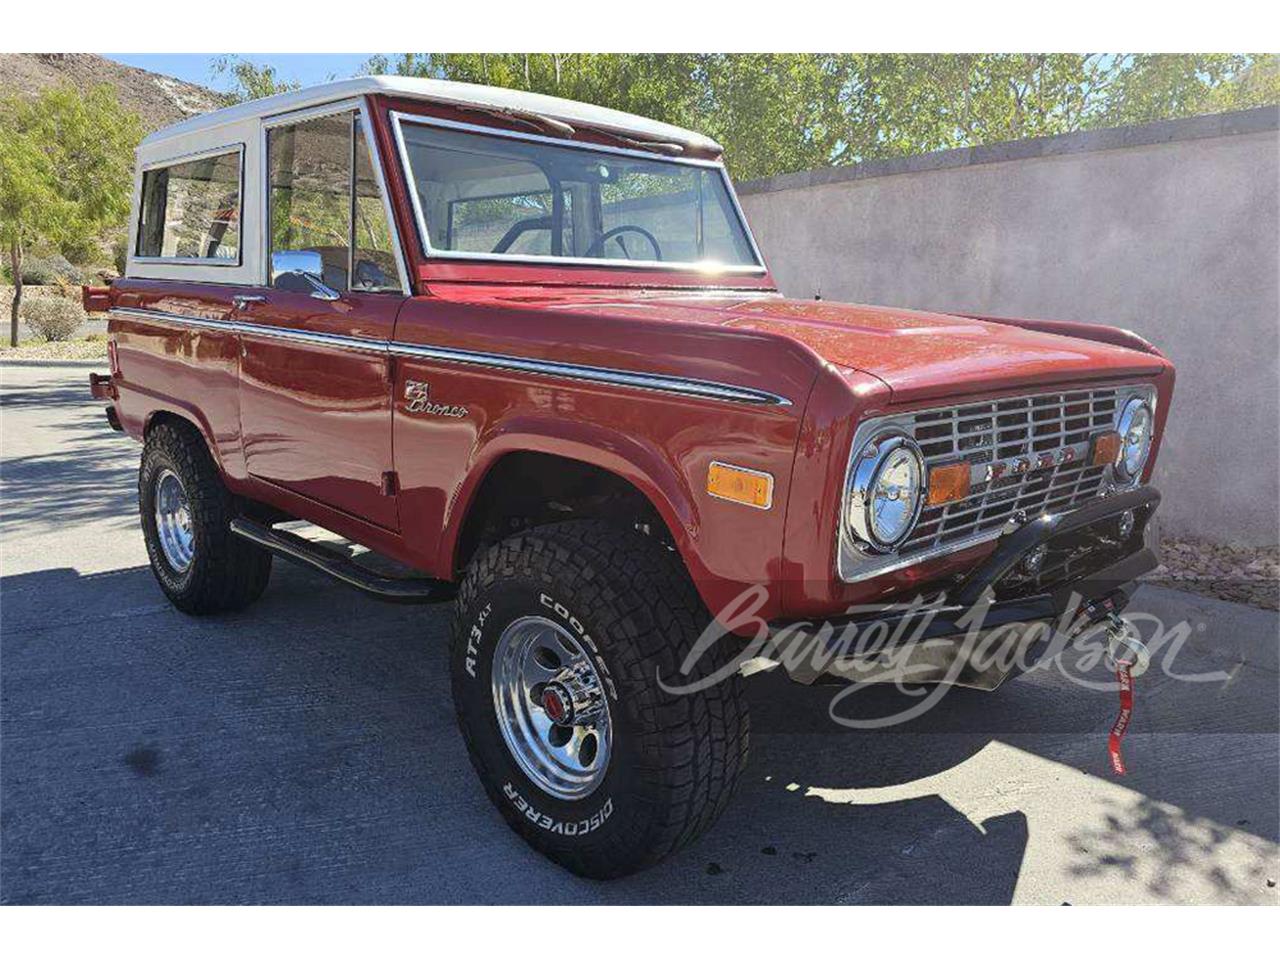 For Sale at Auction: 1977 Ford Bronco in Scottsdale, Arizona for sale in Scottsdale, AZ